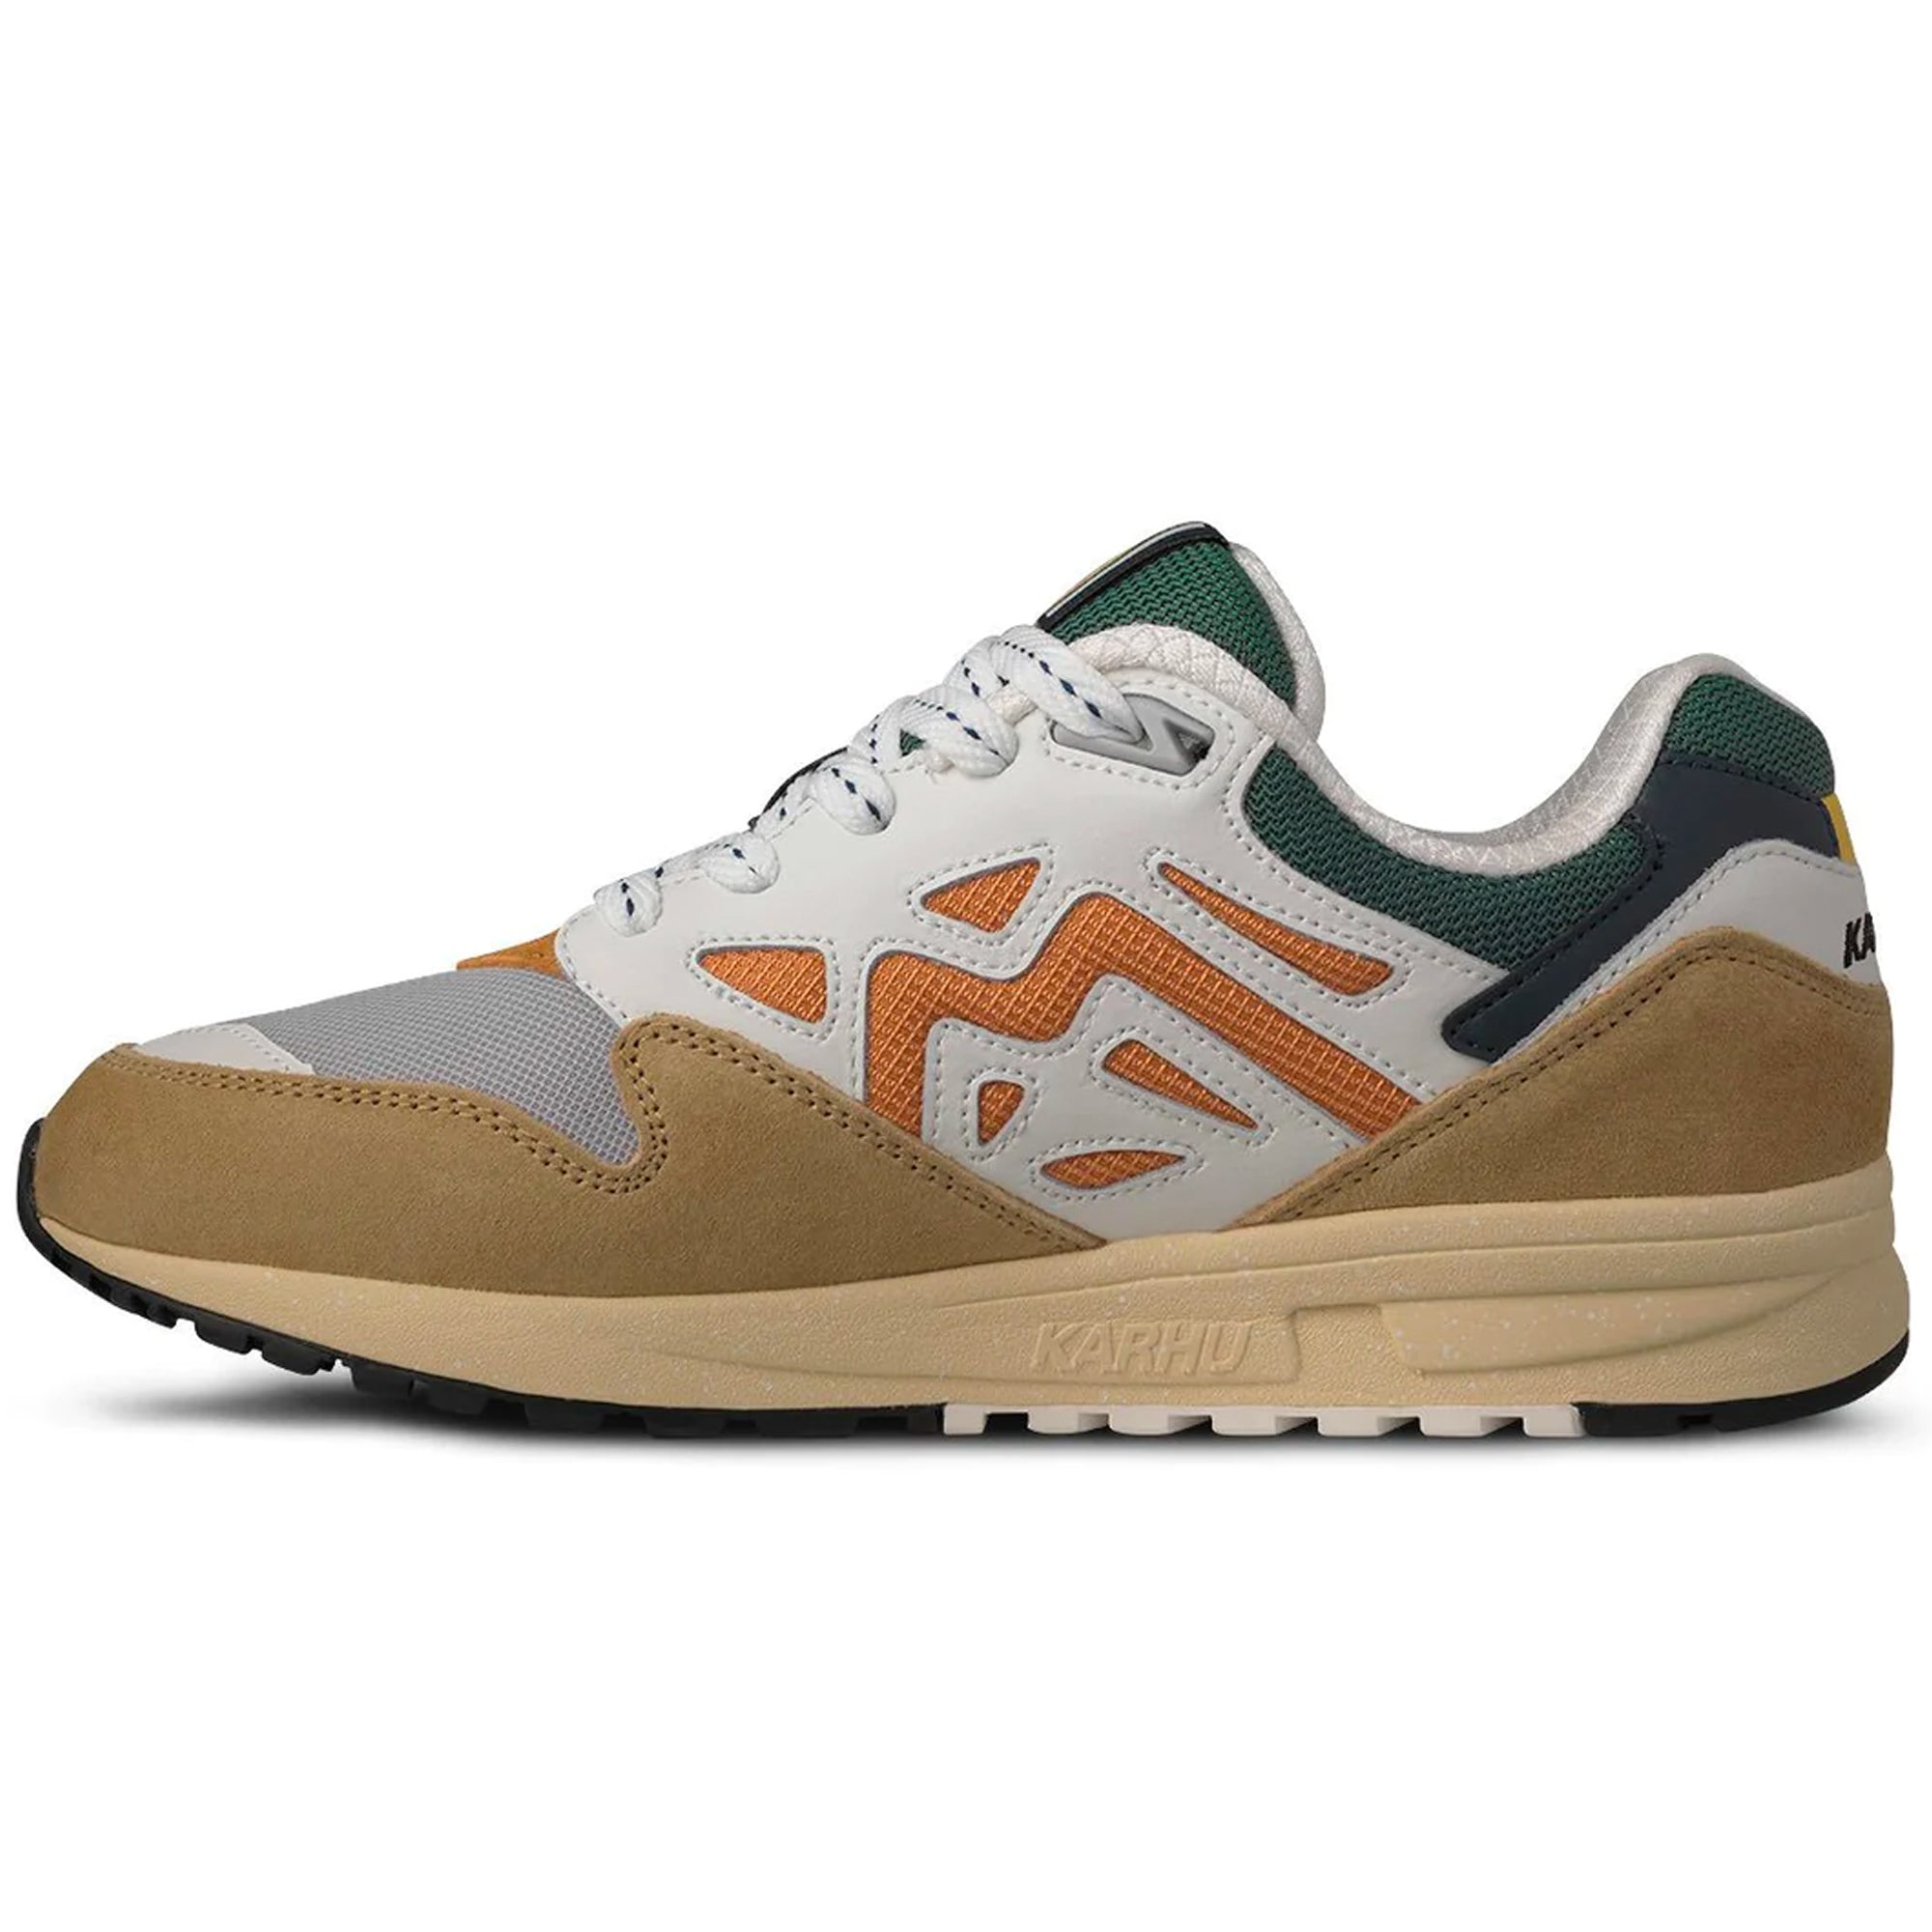 Karhu Legacy 96 Trainers 'The Forest Rules Pack' - Curry / Nugget